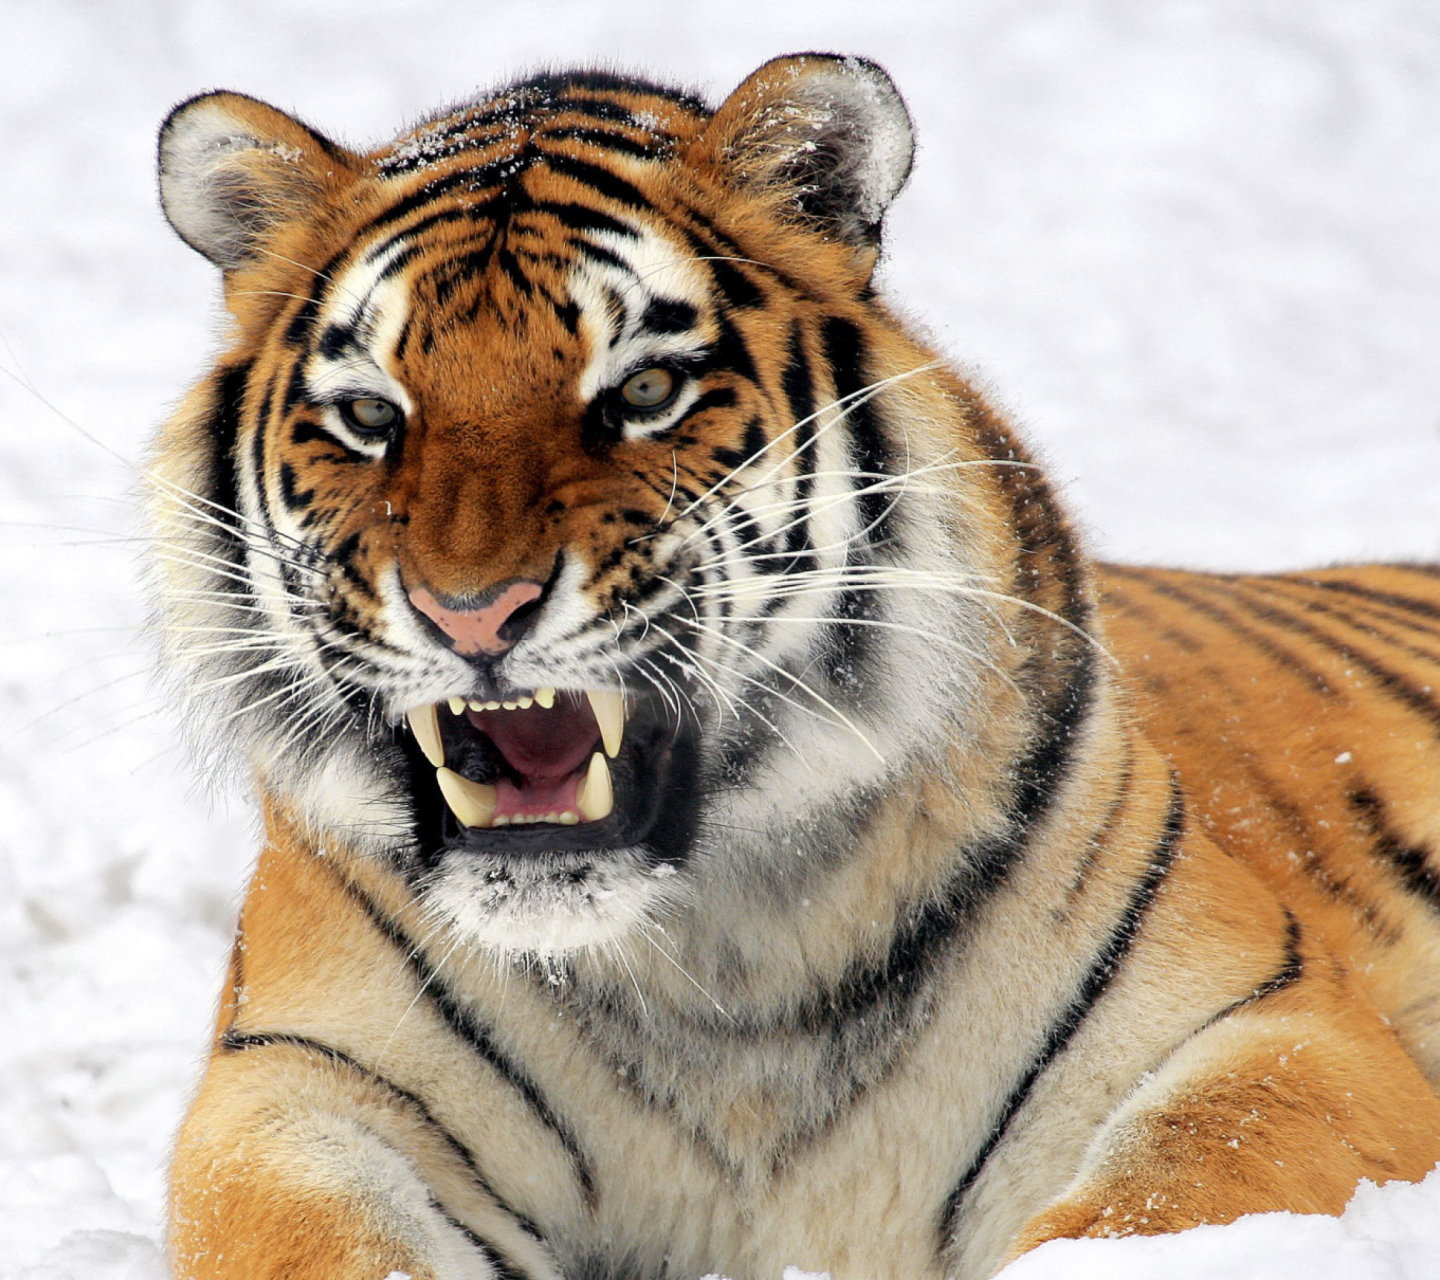 Tiger In The Snow wallpaper 1440x1280